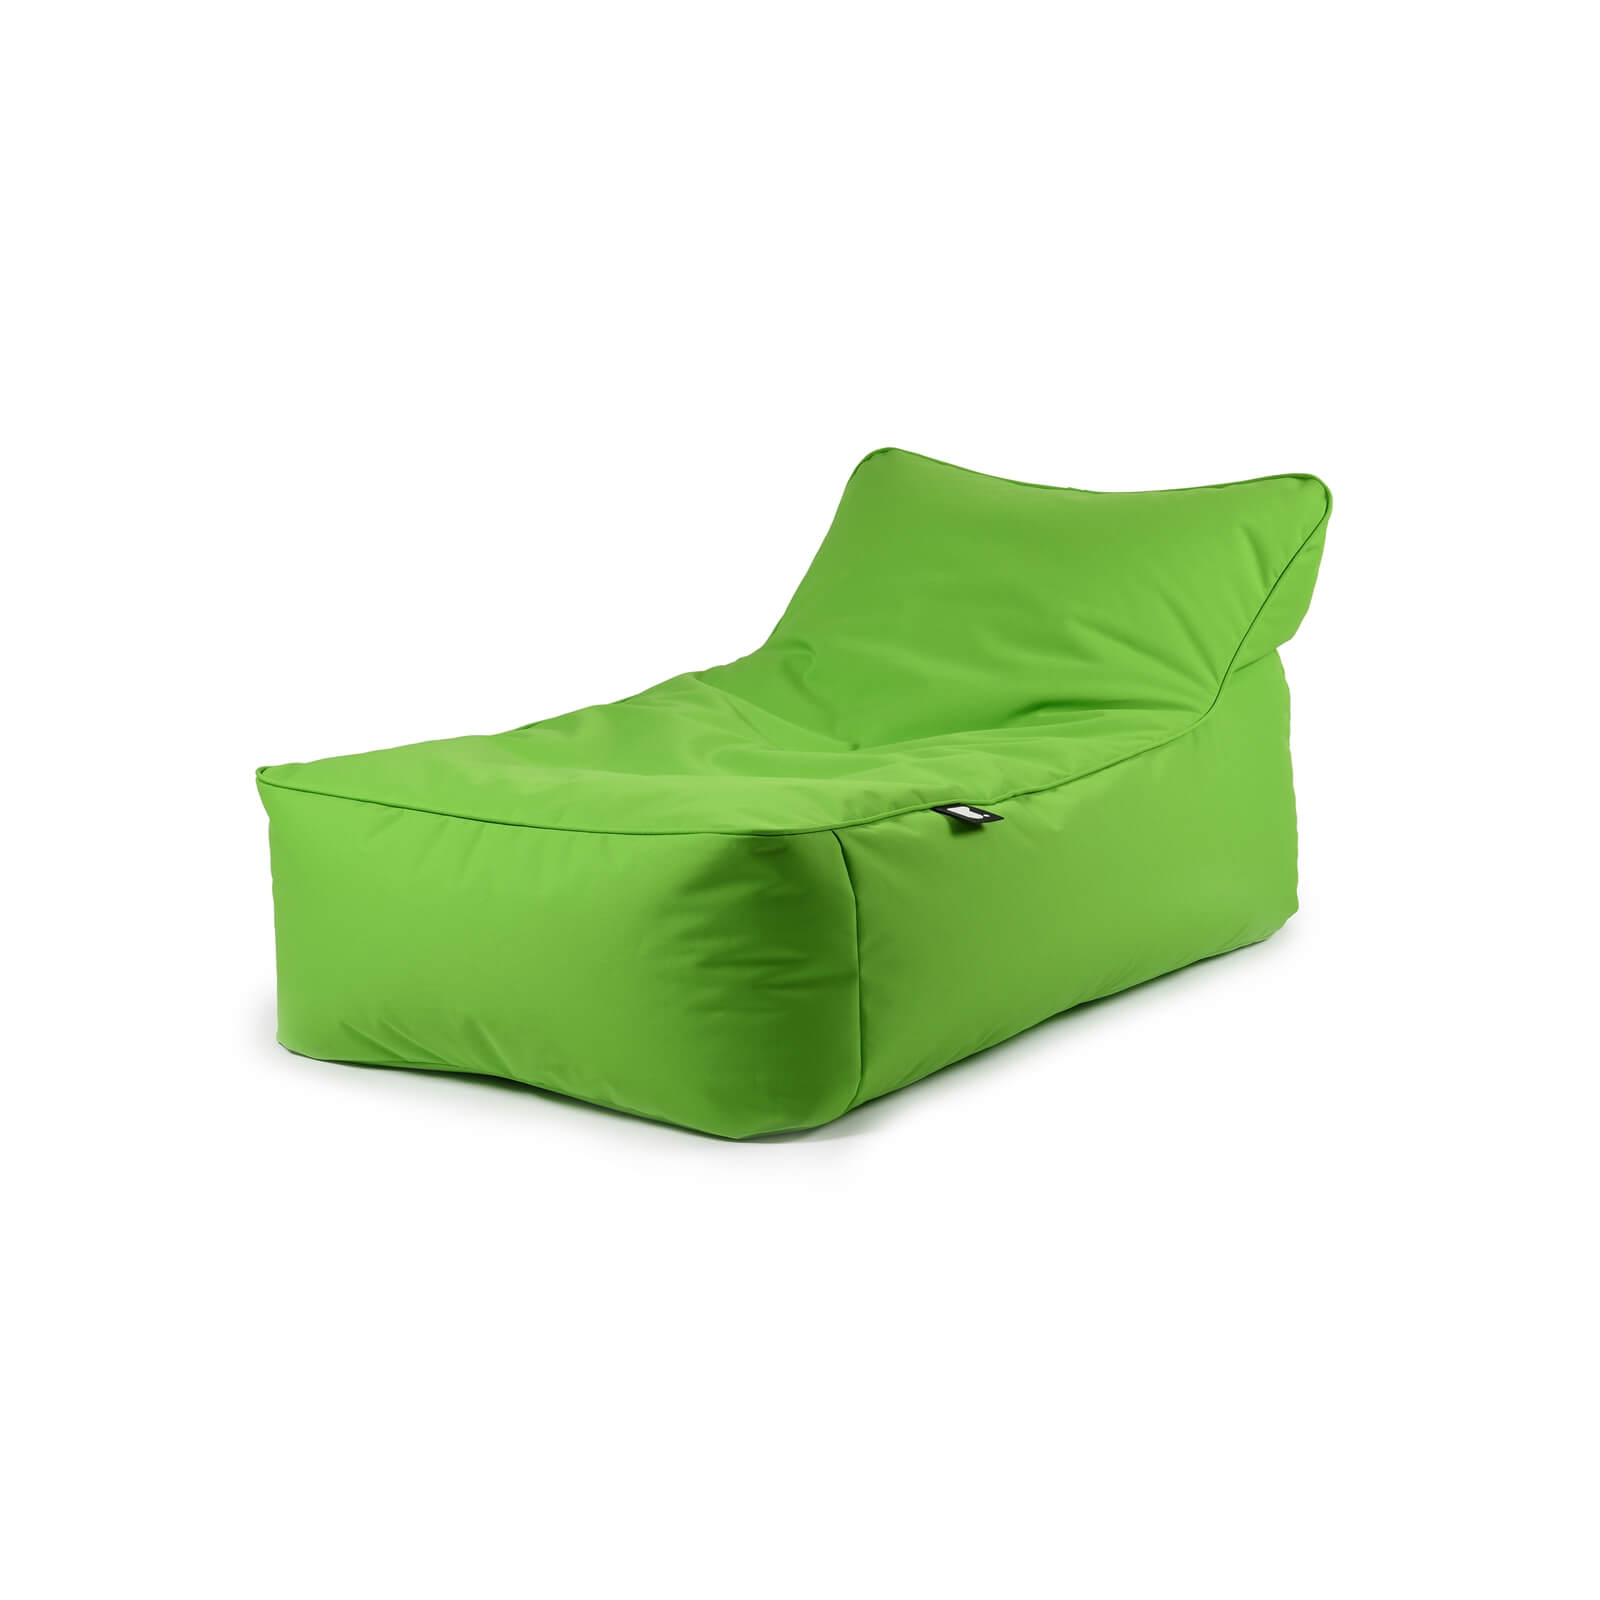 B Bed Outdoor - Lime